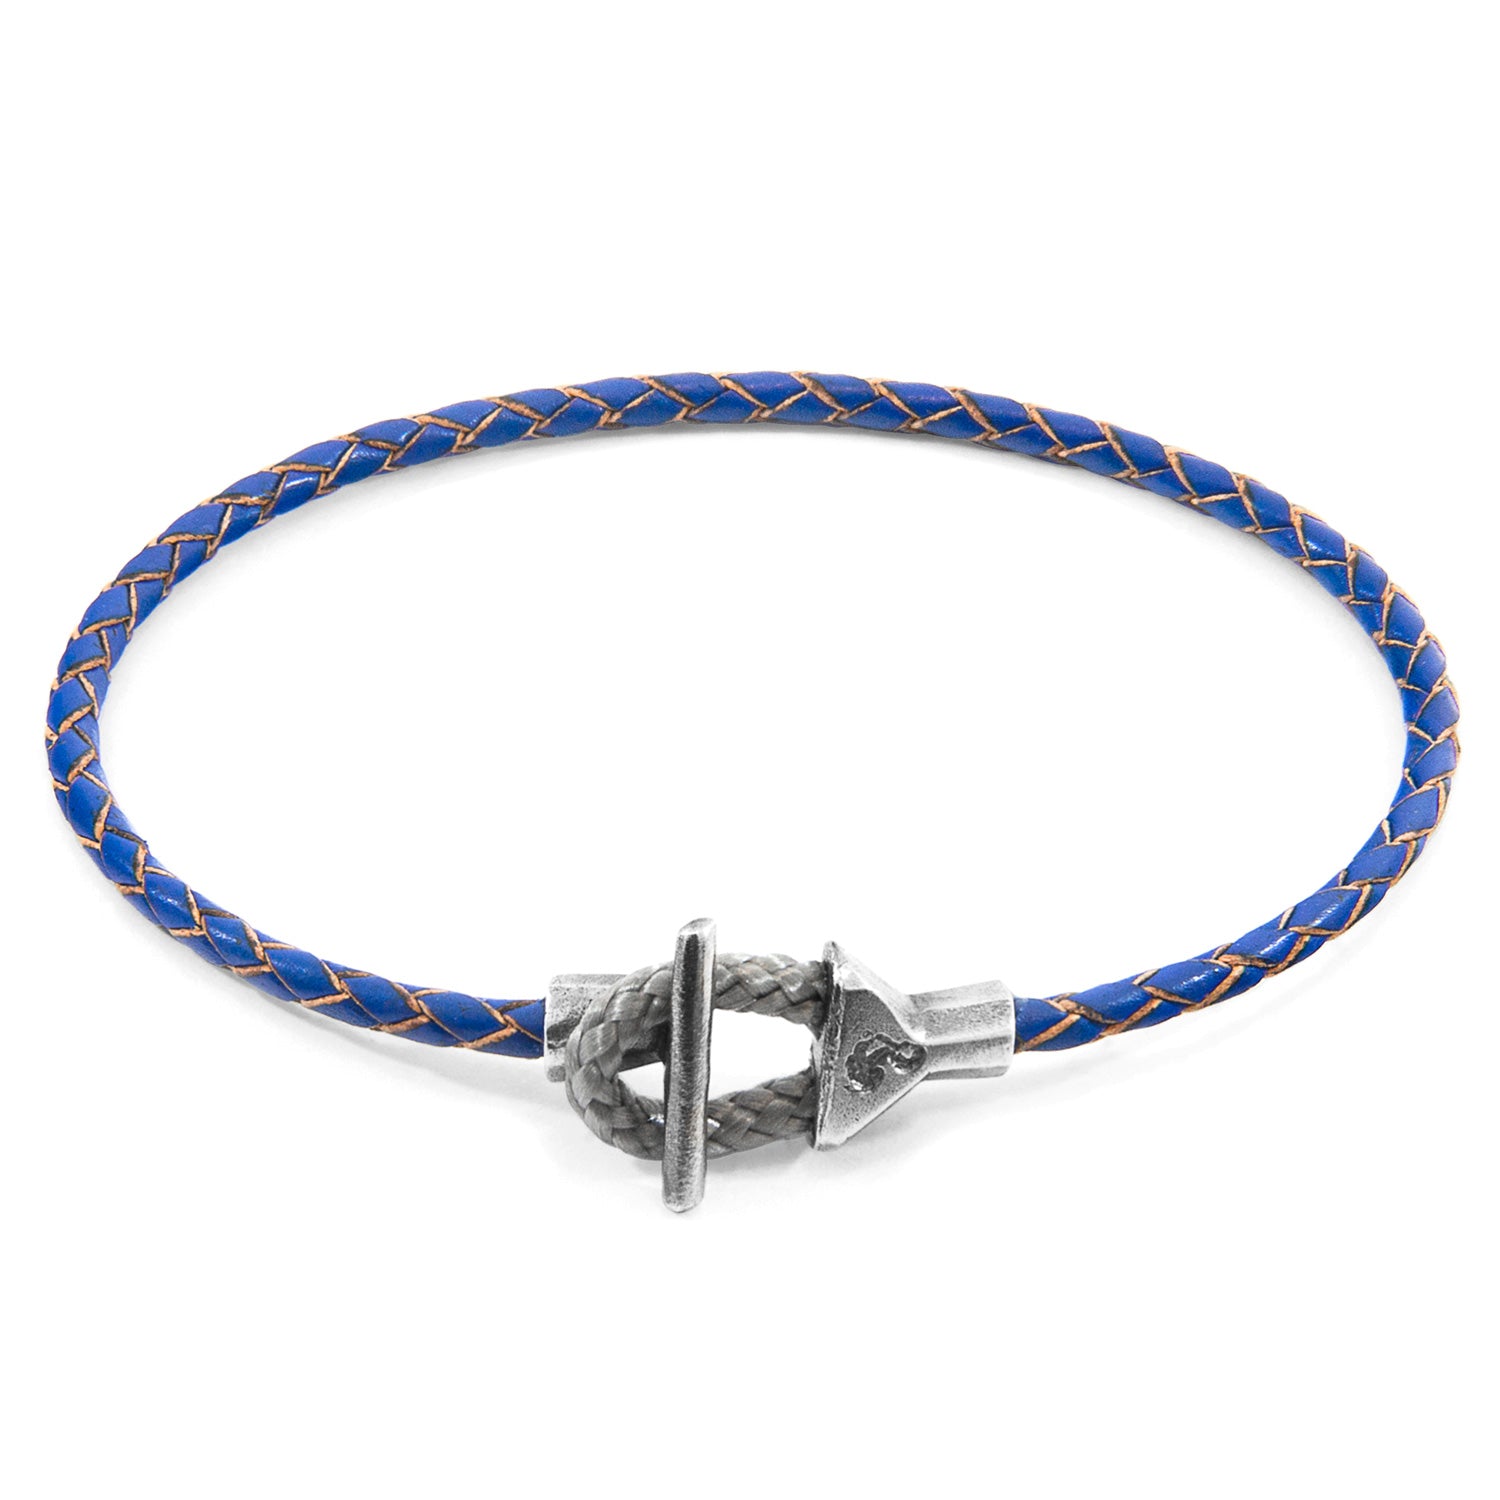 Royal Blue Cullen Silver and Braided Leather Bracelet - Handcrafted in Great Britain with Genuine Leather and Sterling Silver Clasp - Available in Multiple Sizes - Bracelets - Bijou Her -  -  - 